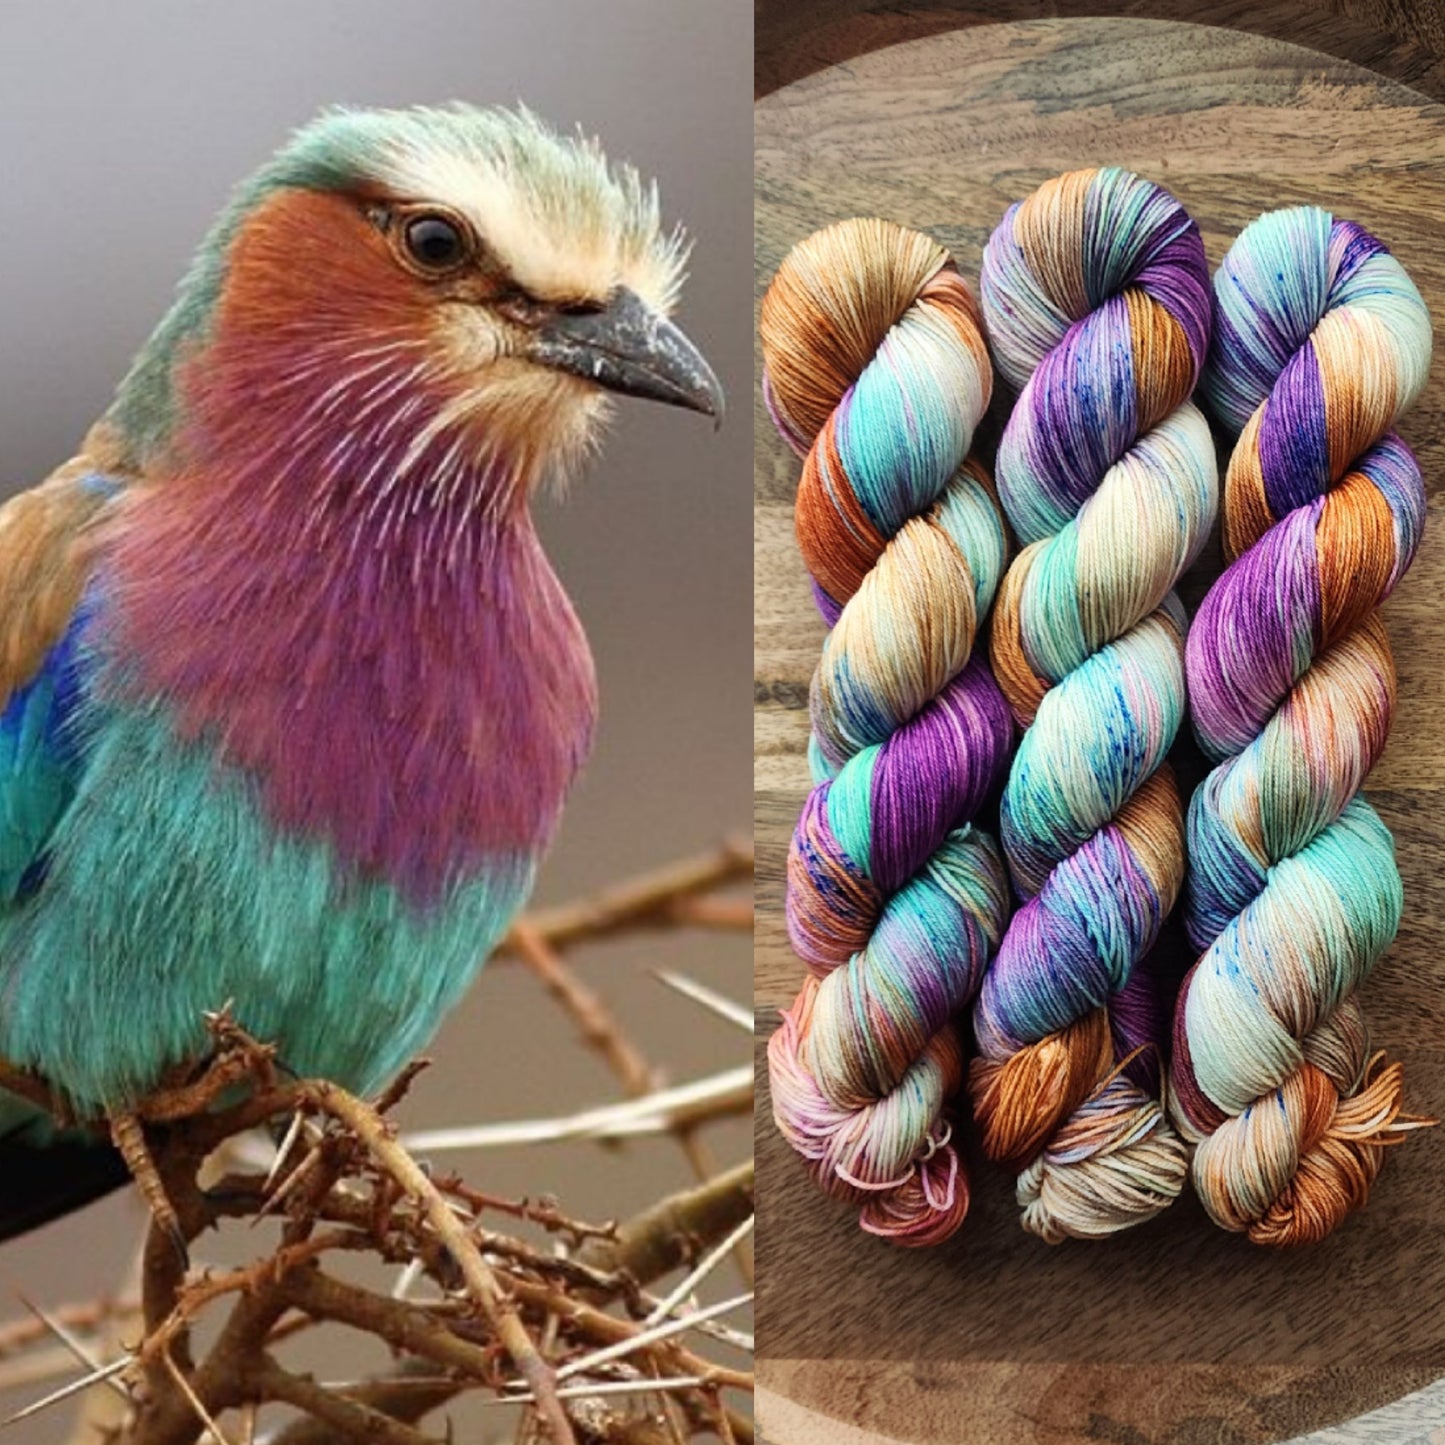 PRE-ORDER: Lilac-Breasted Roller